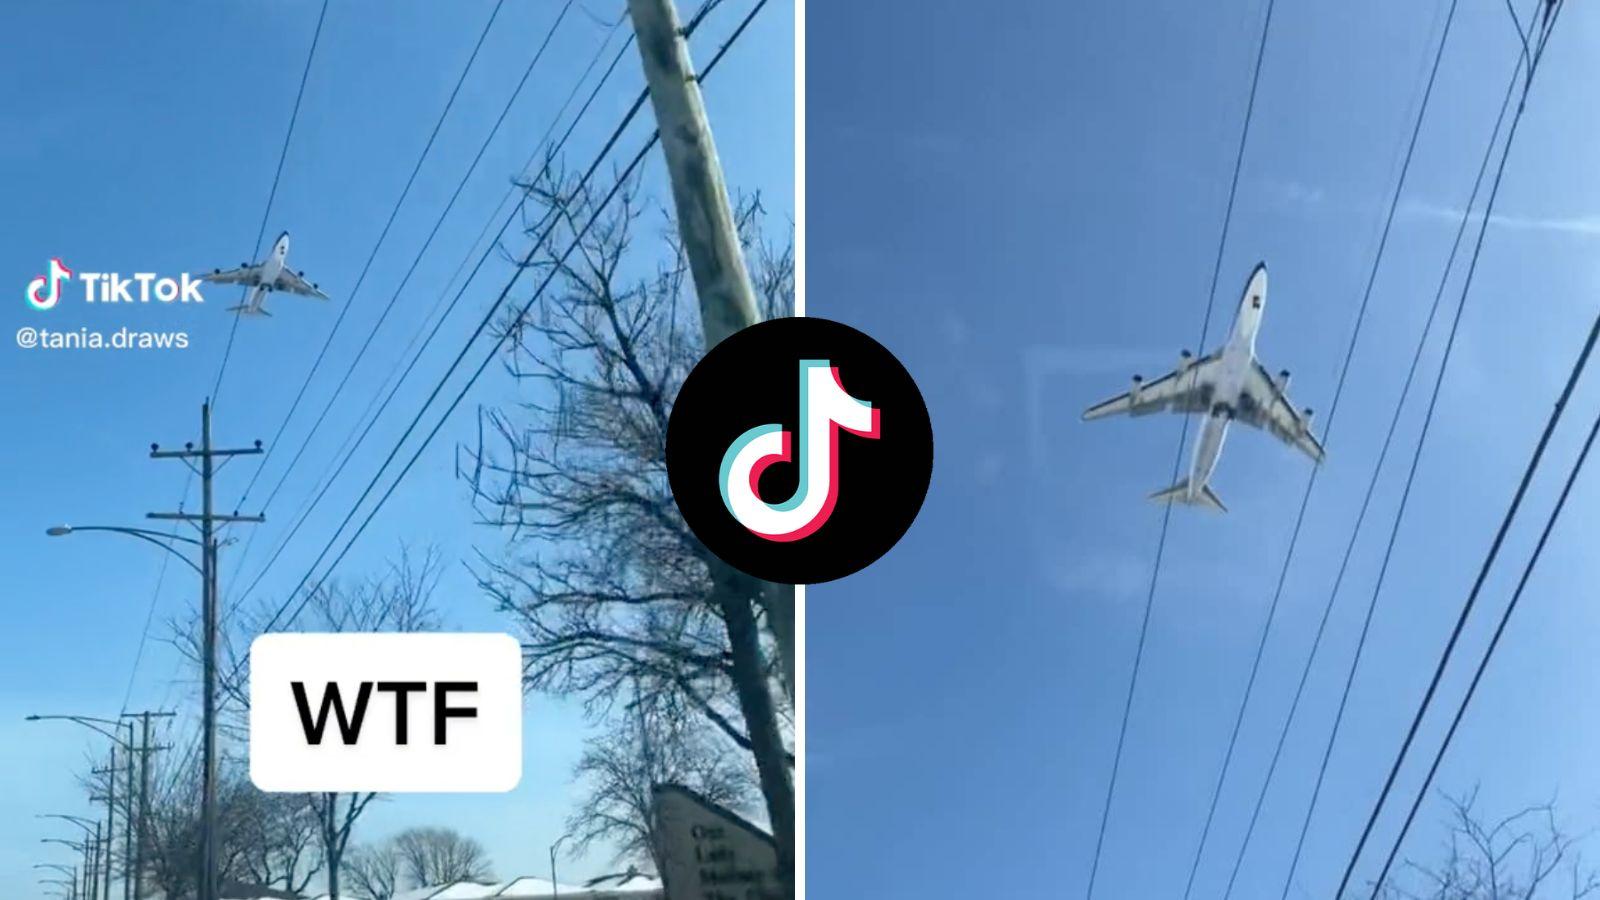 Viral video of plane not moving in the air sparks conspiracy theories